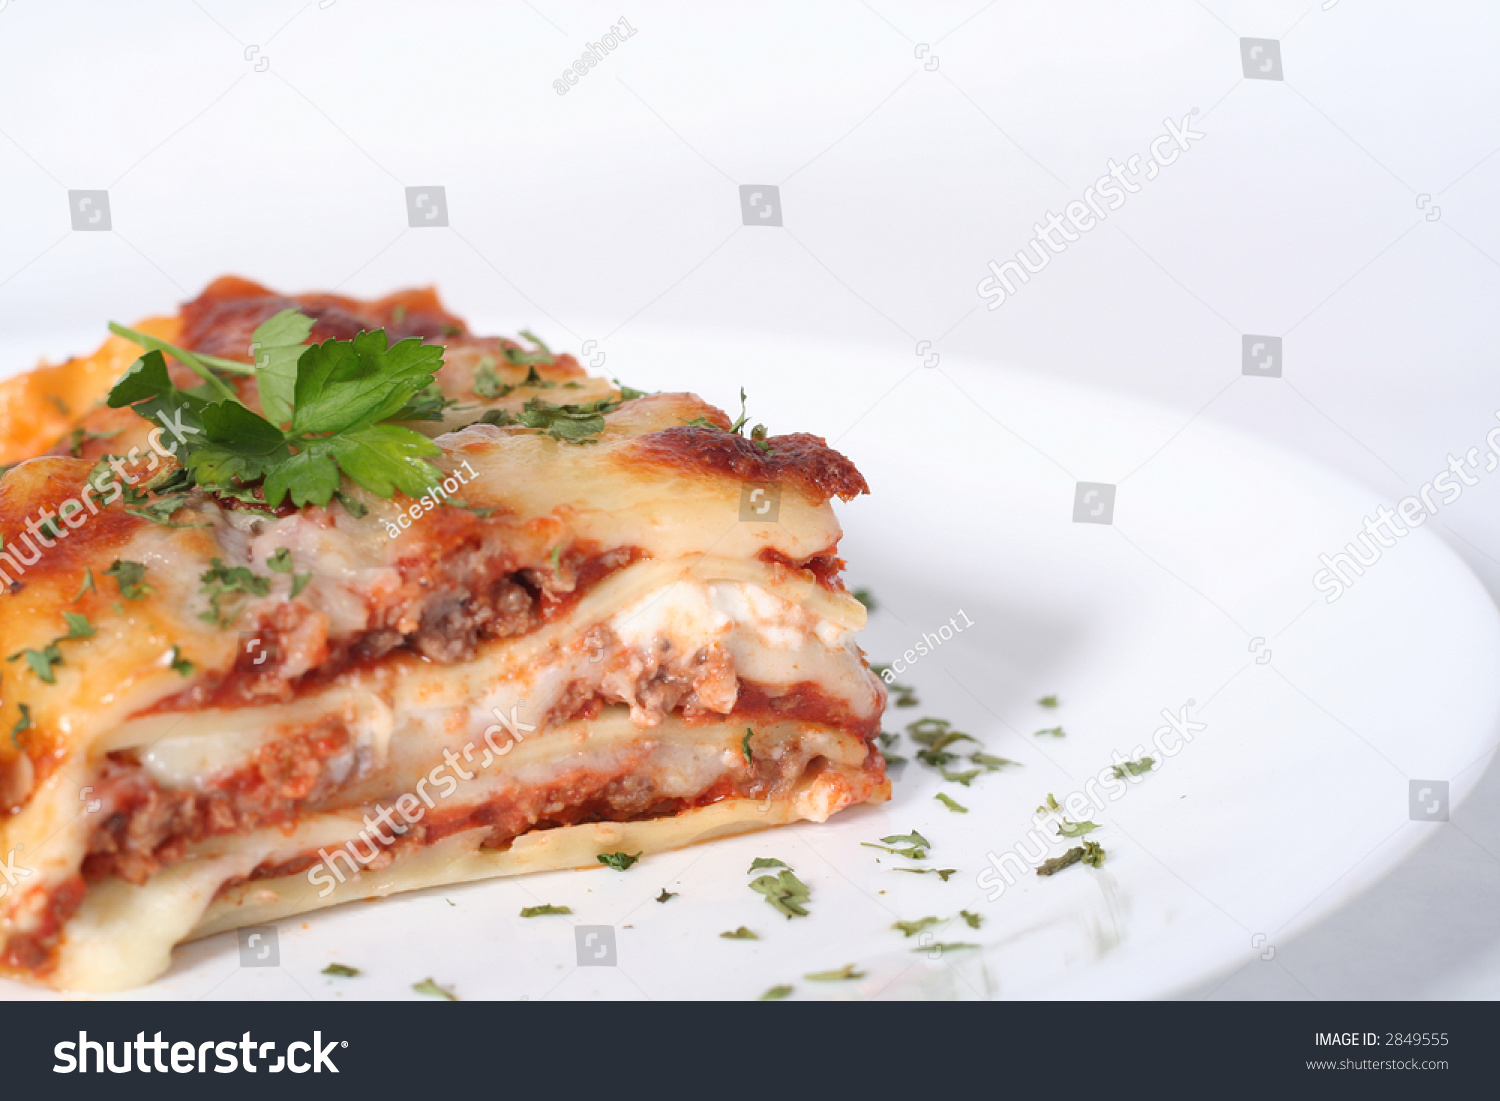 Italian Lasagna Garnished With Parsley On A White Plate Against A White ...